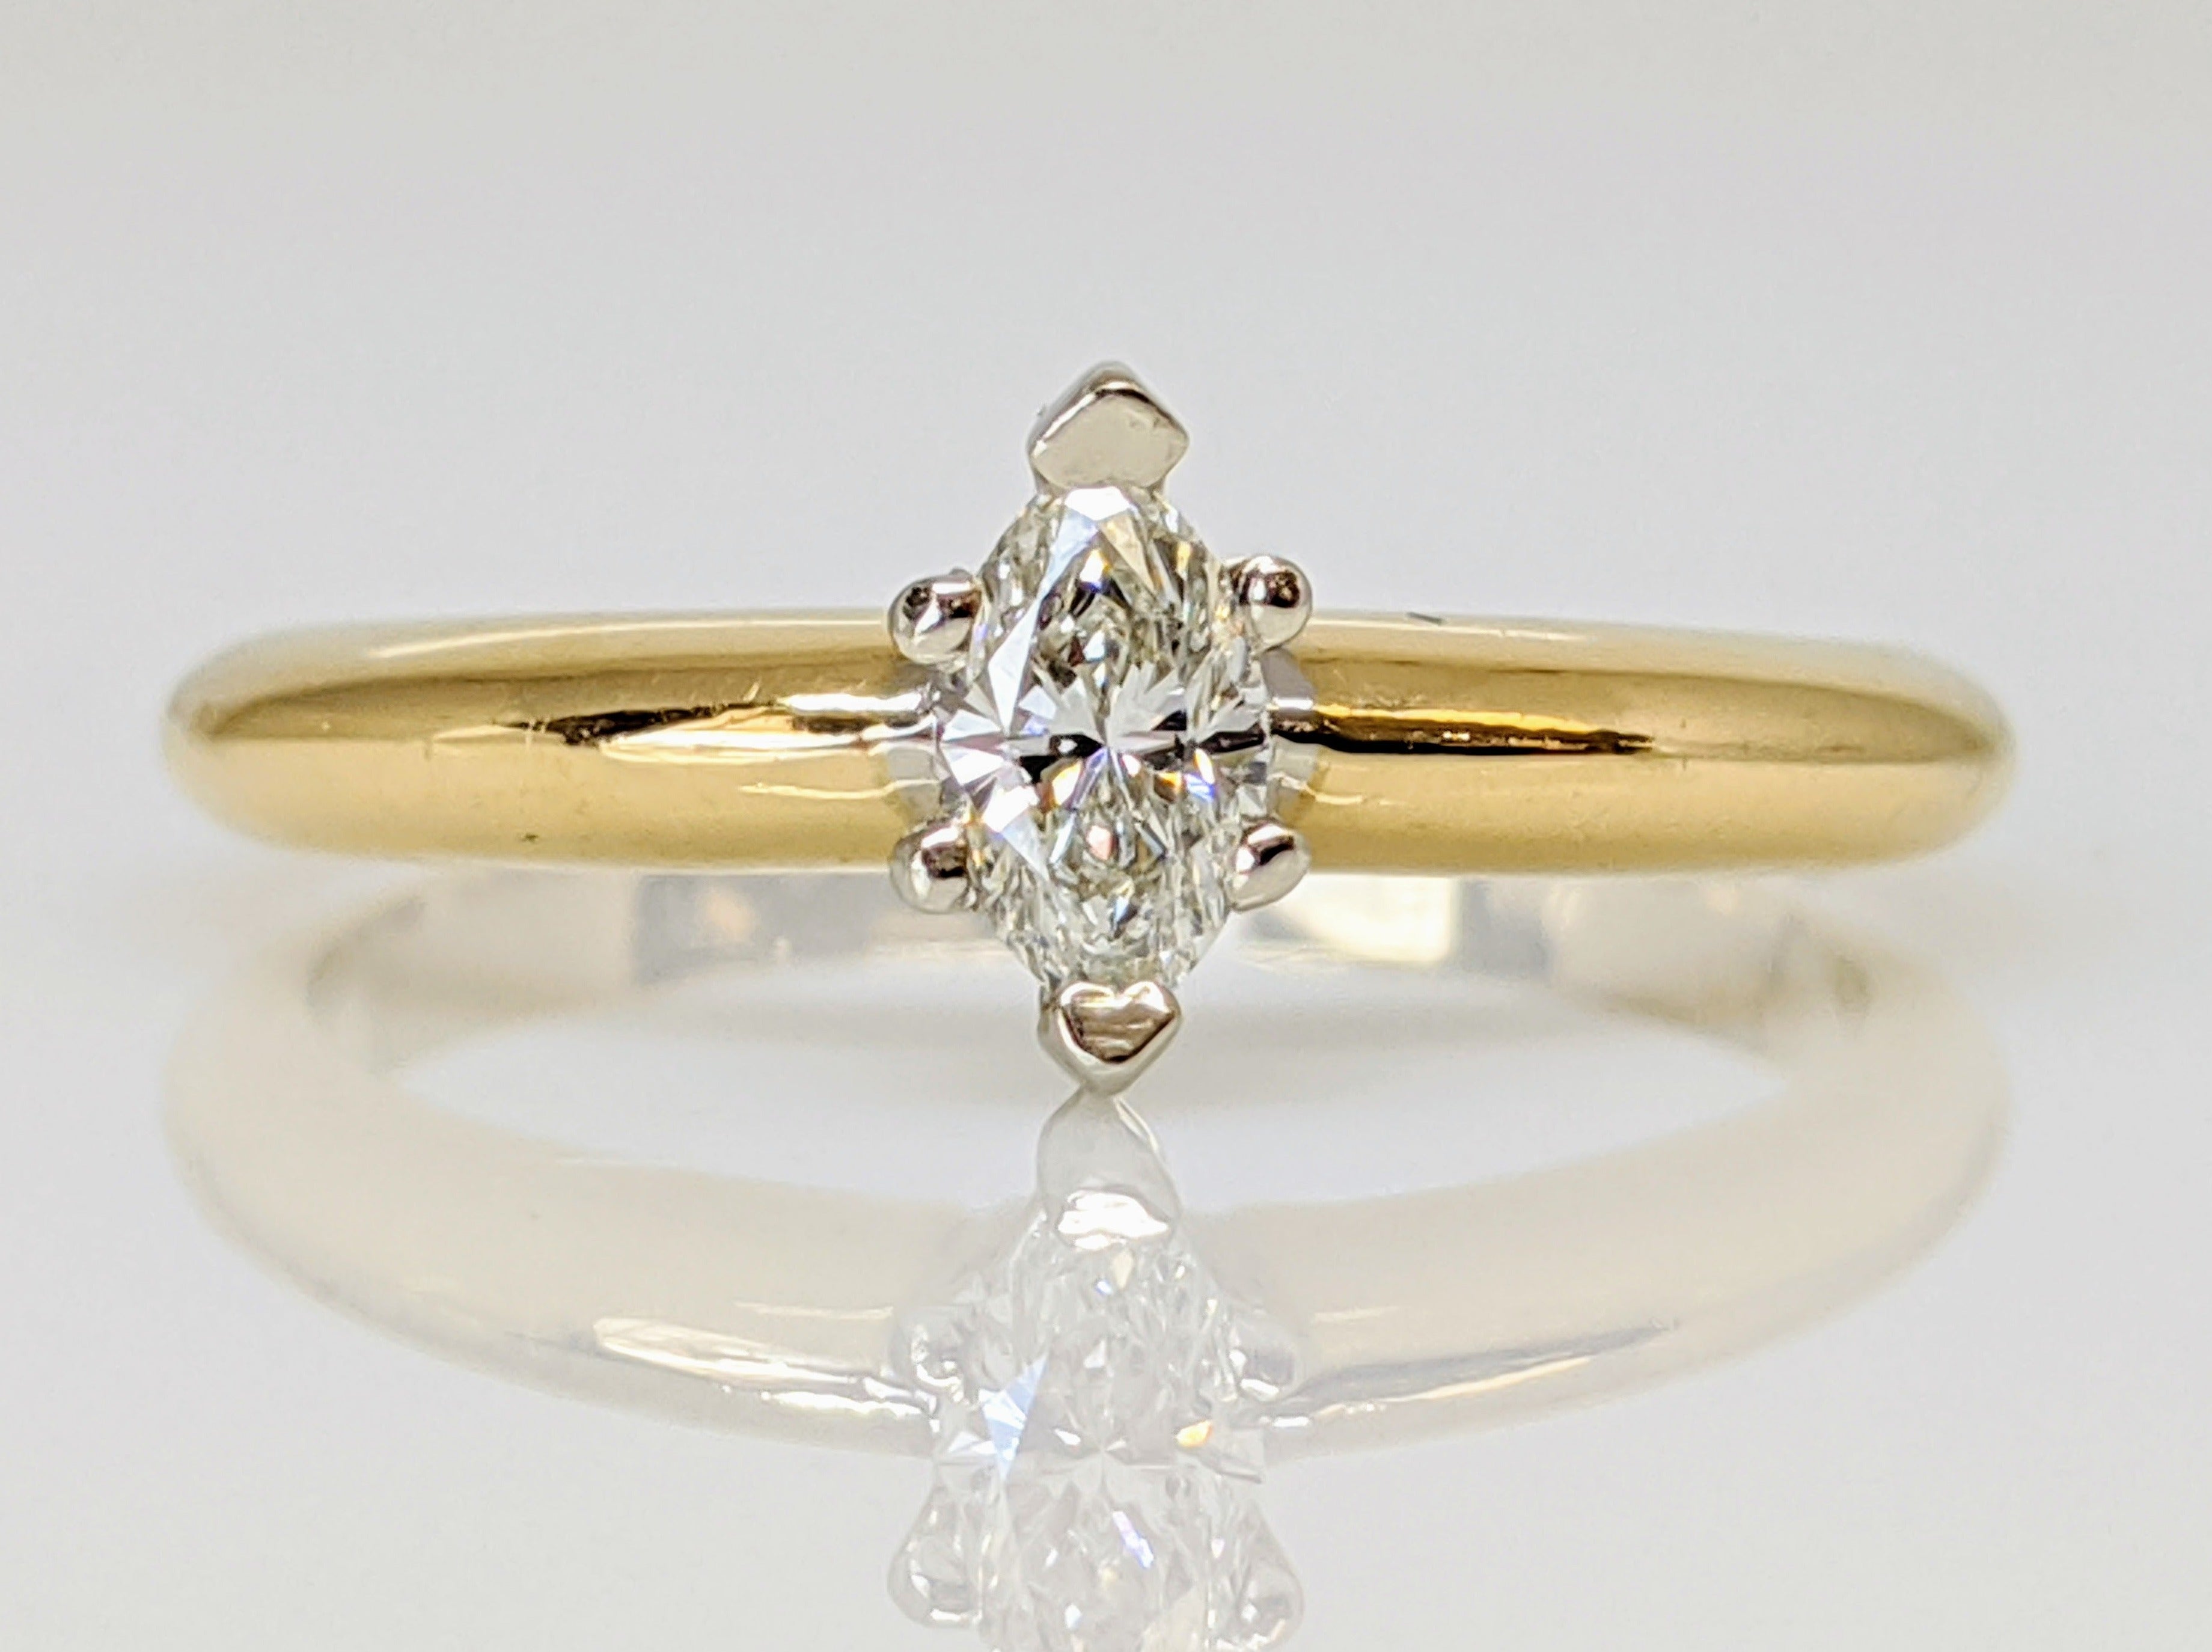 18K Solid Gold VS1 or Better 1/4 CT Diamond Solitaire Engagement Ring Size  6 1/2 | eBay